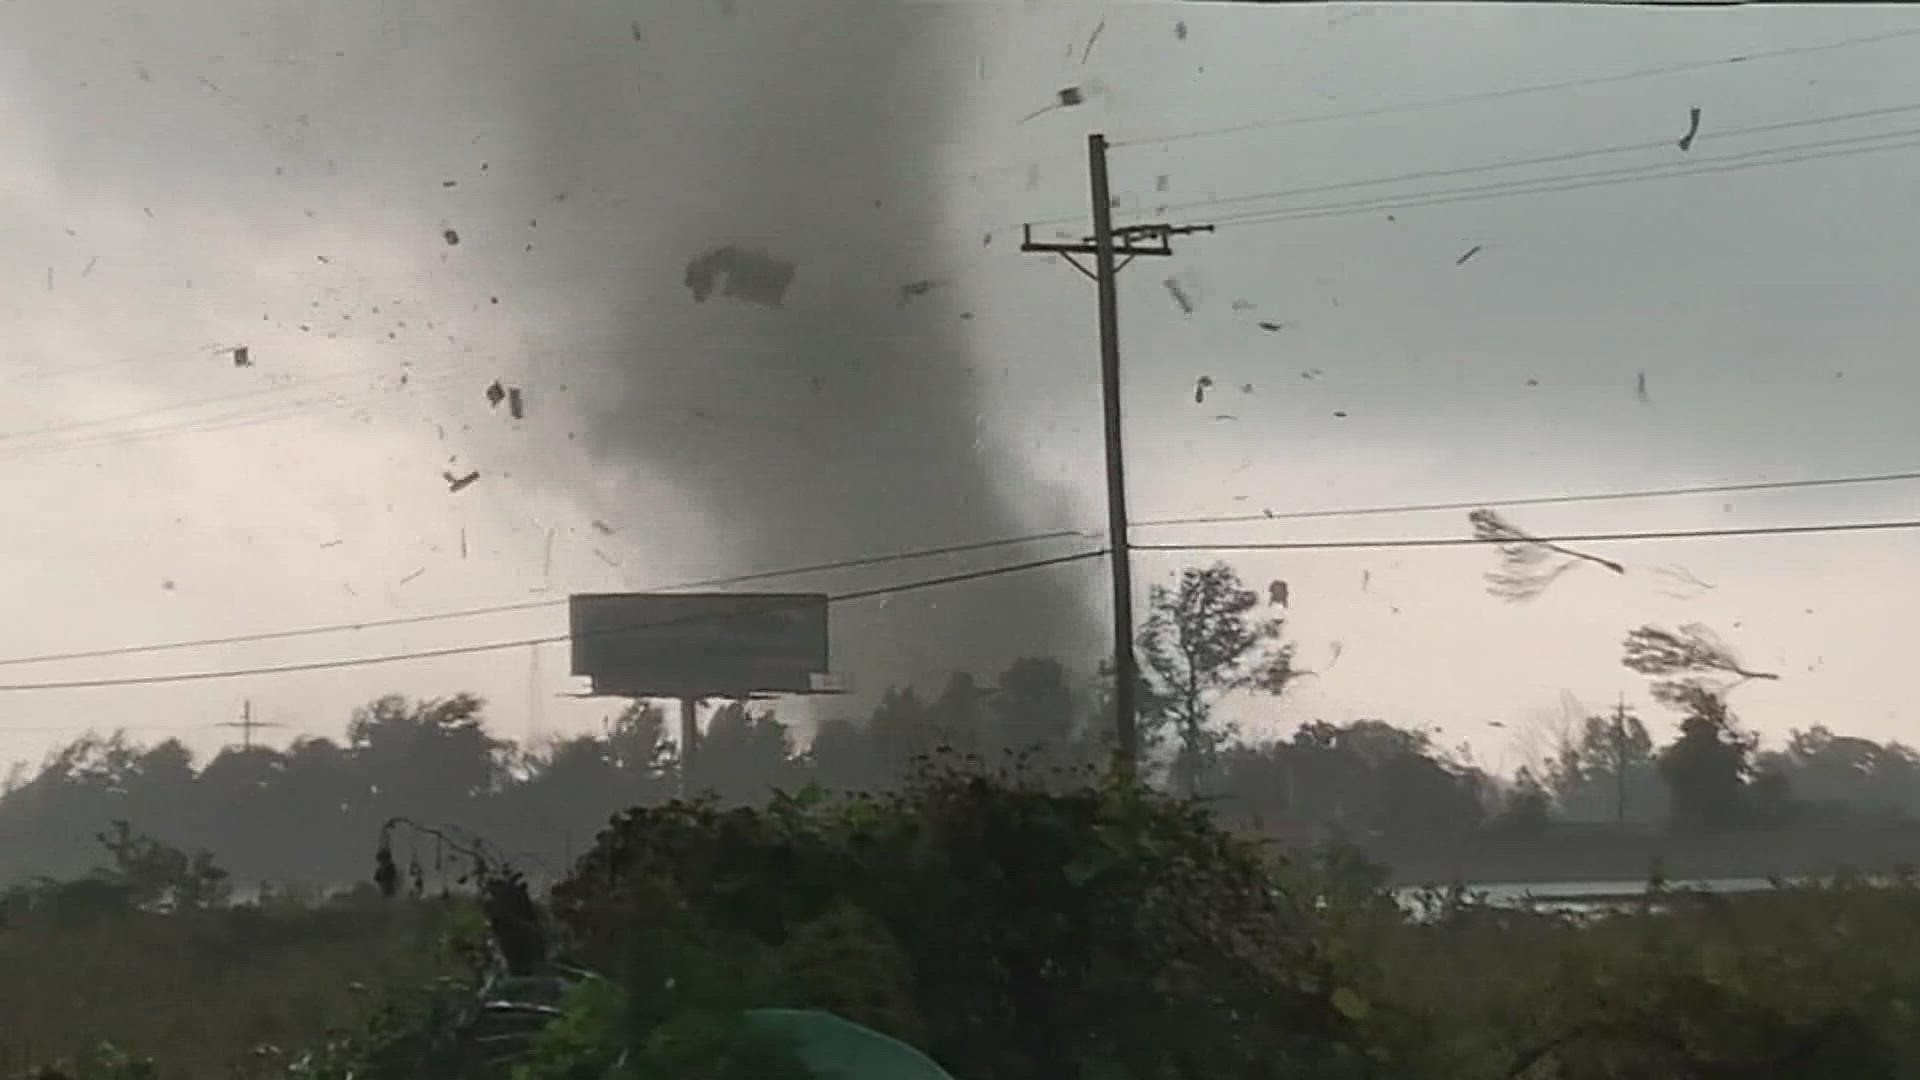 A tornado in Orange near Interstate 10 and Highway 62 shot just before 9:30 a.m. Wednesday morning.